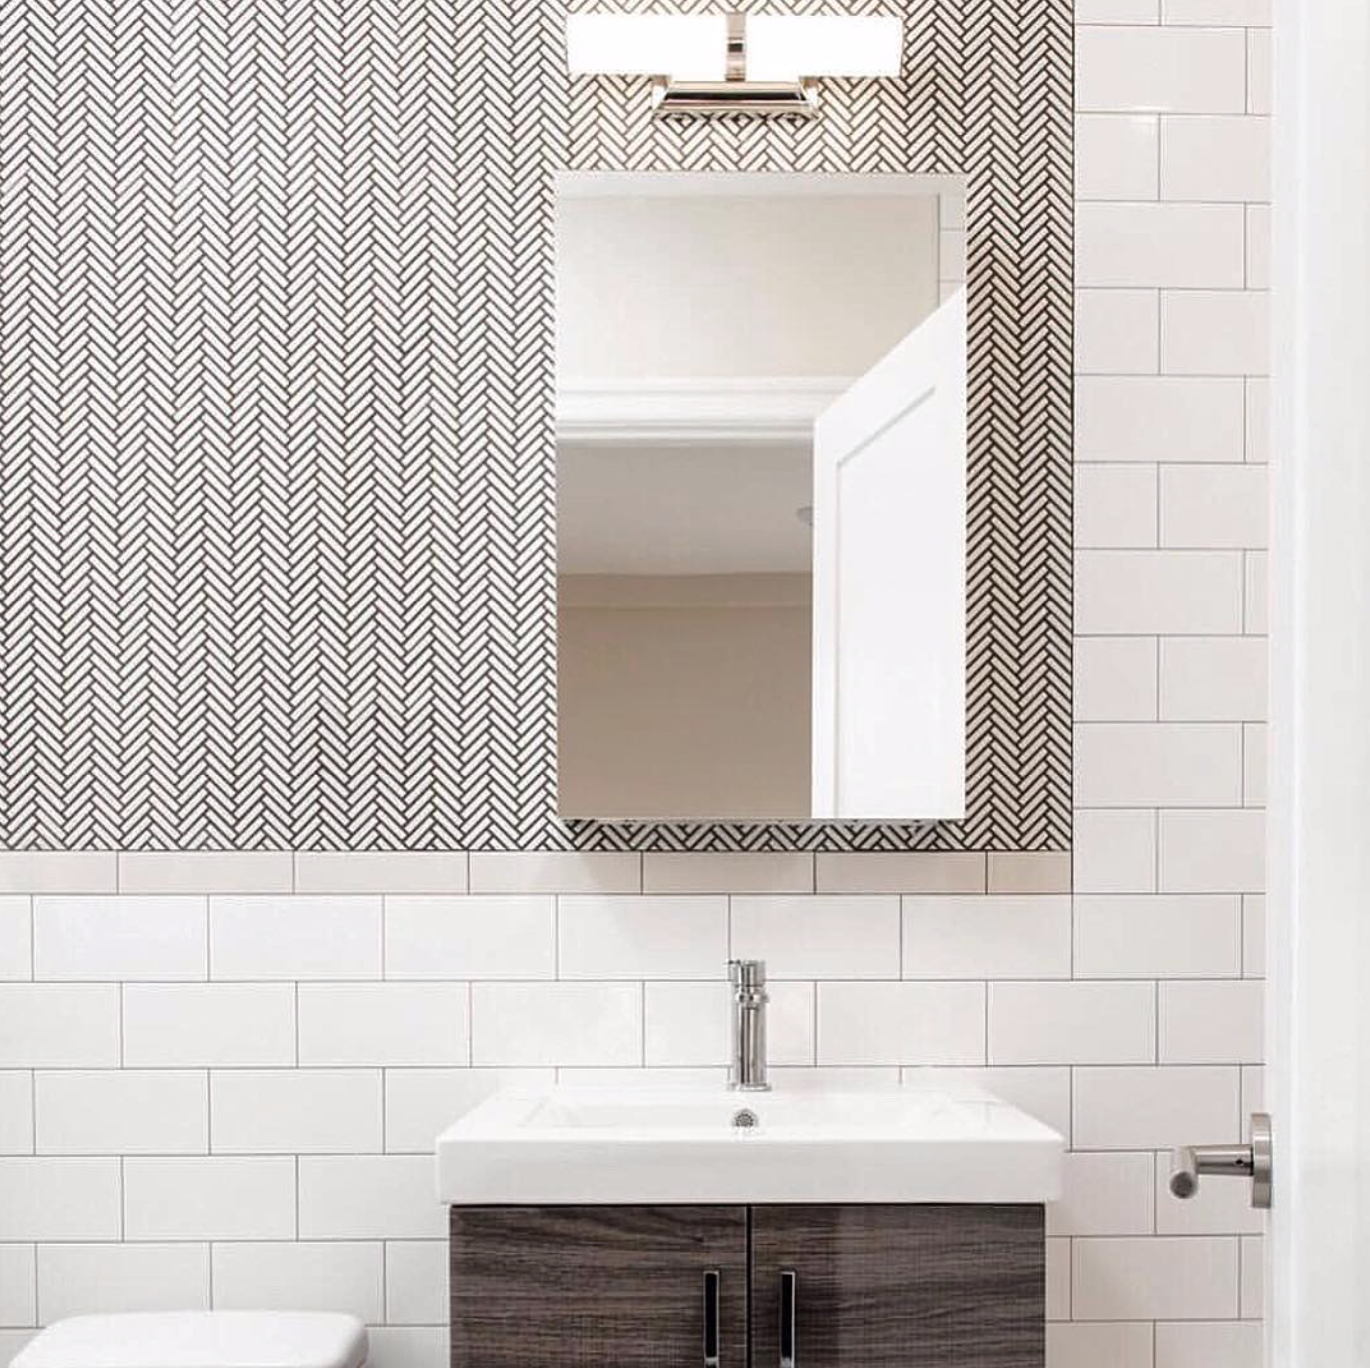  Bold herringbone tile and sleek storage solutions give this New York City bathroom a clean and modern aesthetic. Design by  @perianth_buymyeye ; photo by  @njohnstonphotography  